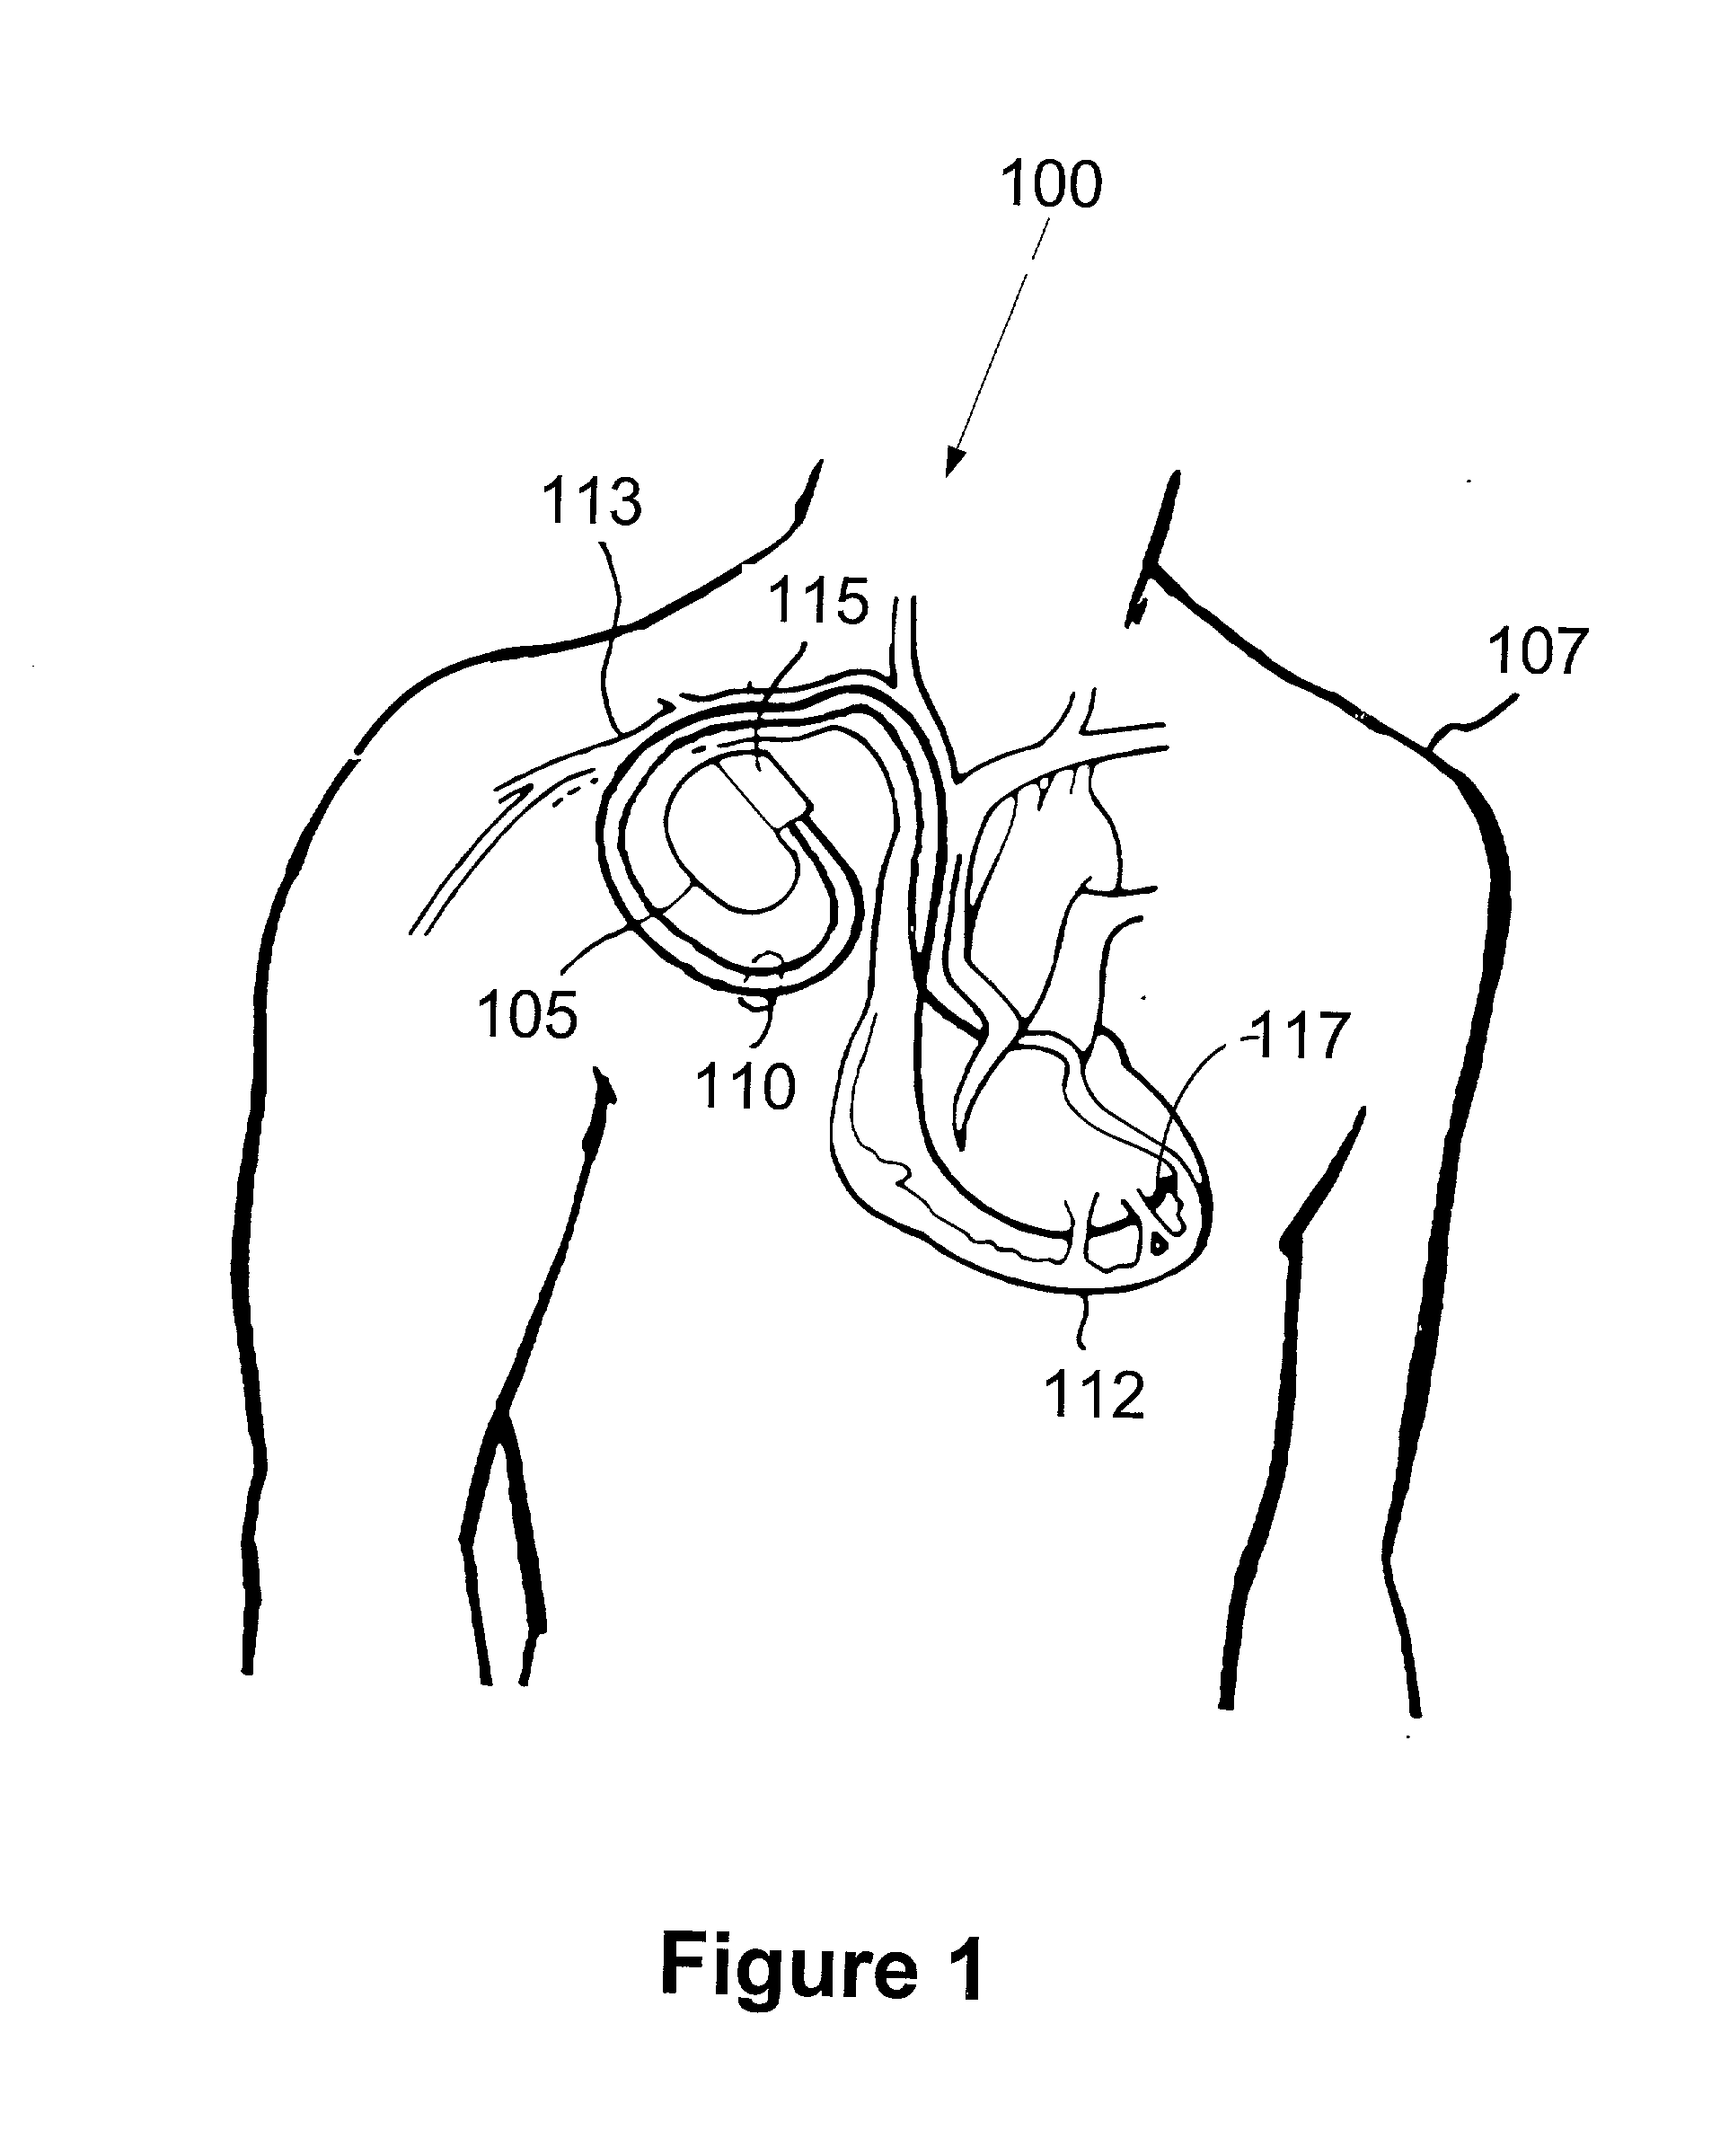 Method and apparatus for controlling an implantable medical device in response to the presence of a magnetic field and/or high frequency radiation interference signals